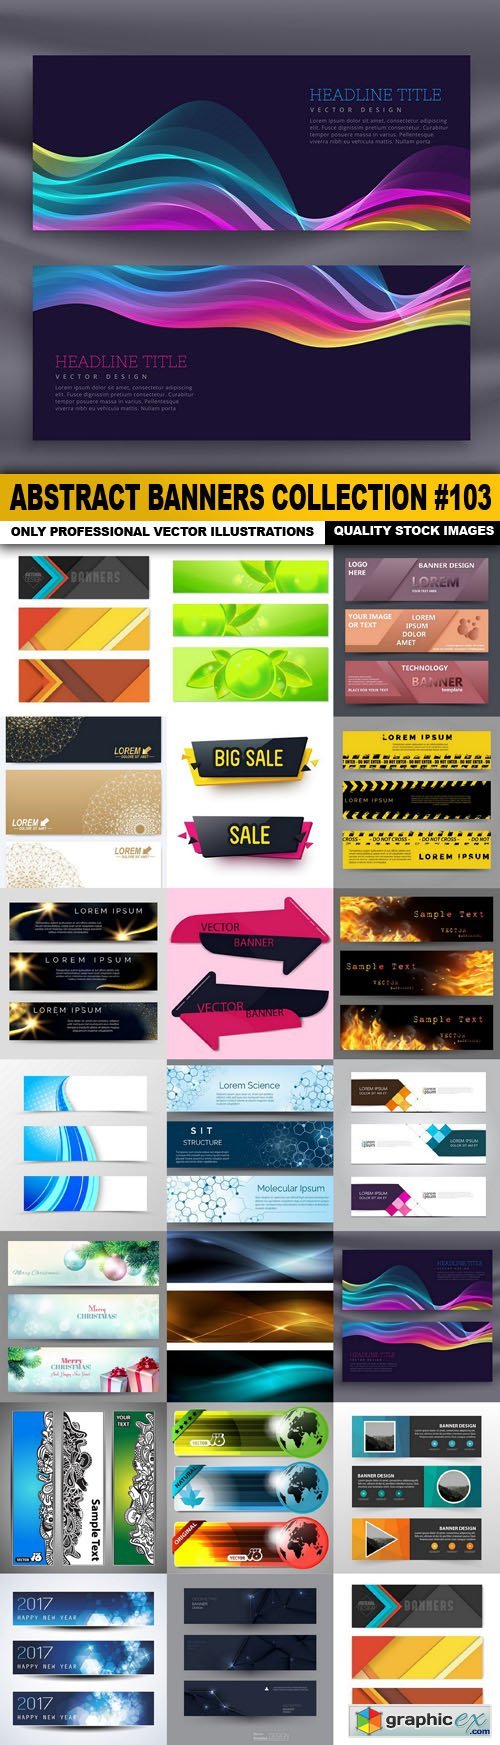 Abstract Banners Collection #103 - 20 Vectors